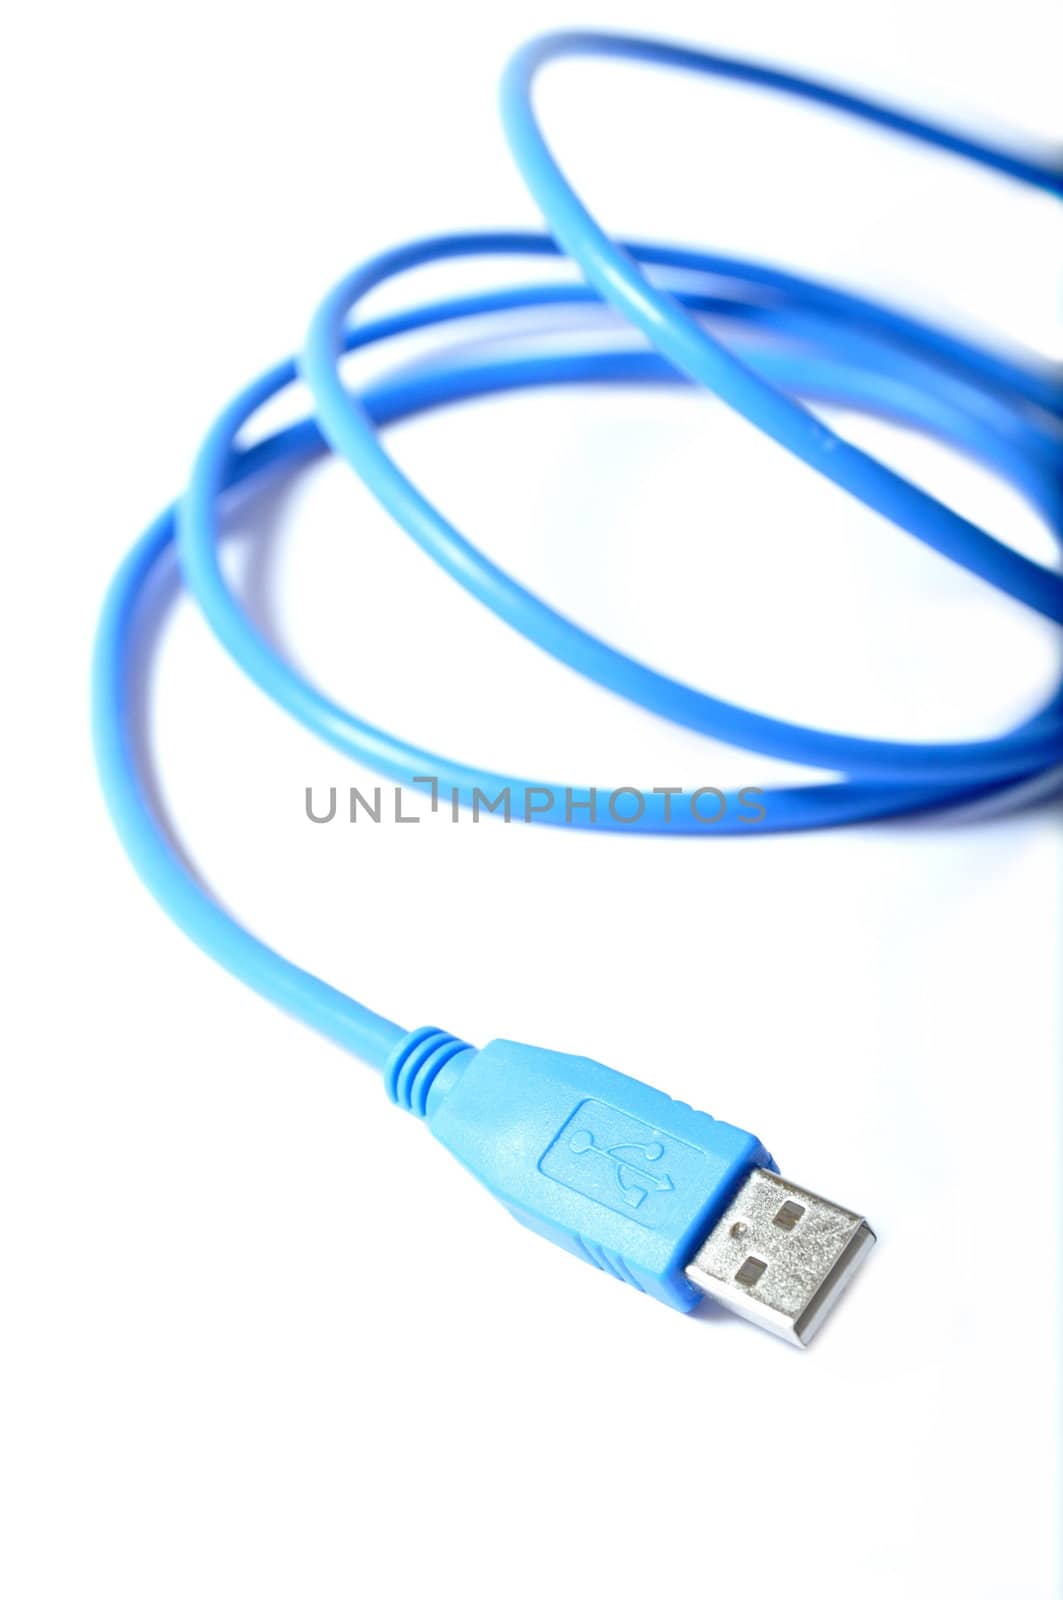 Blue USB cable on wite background